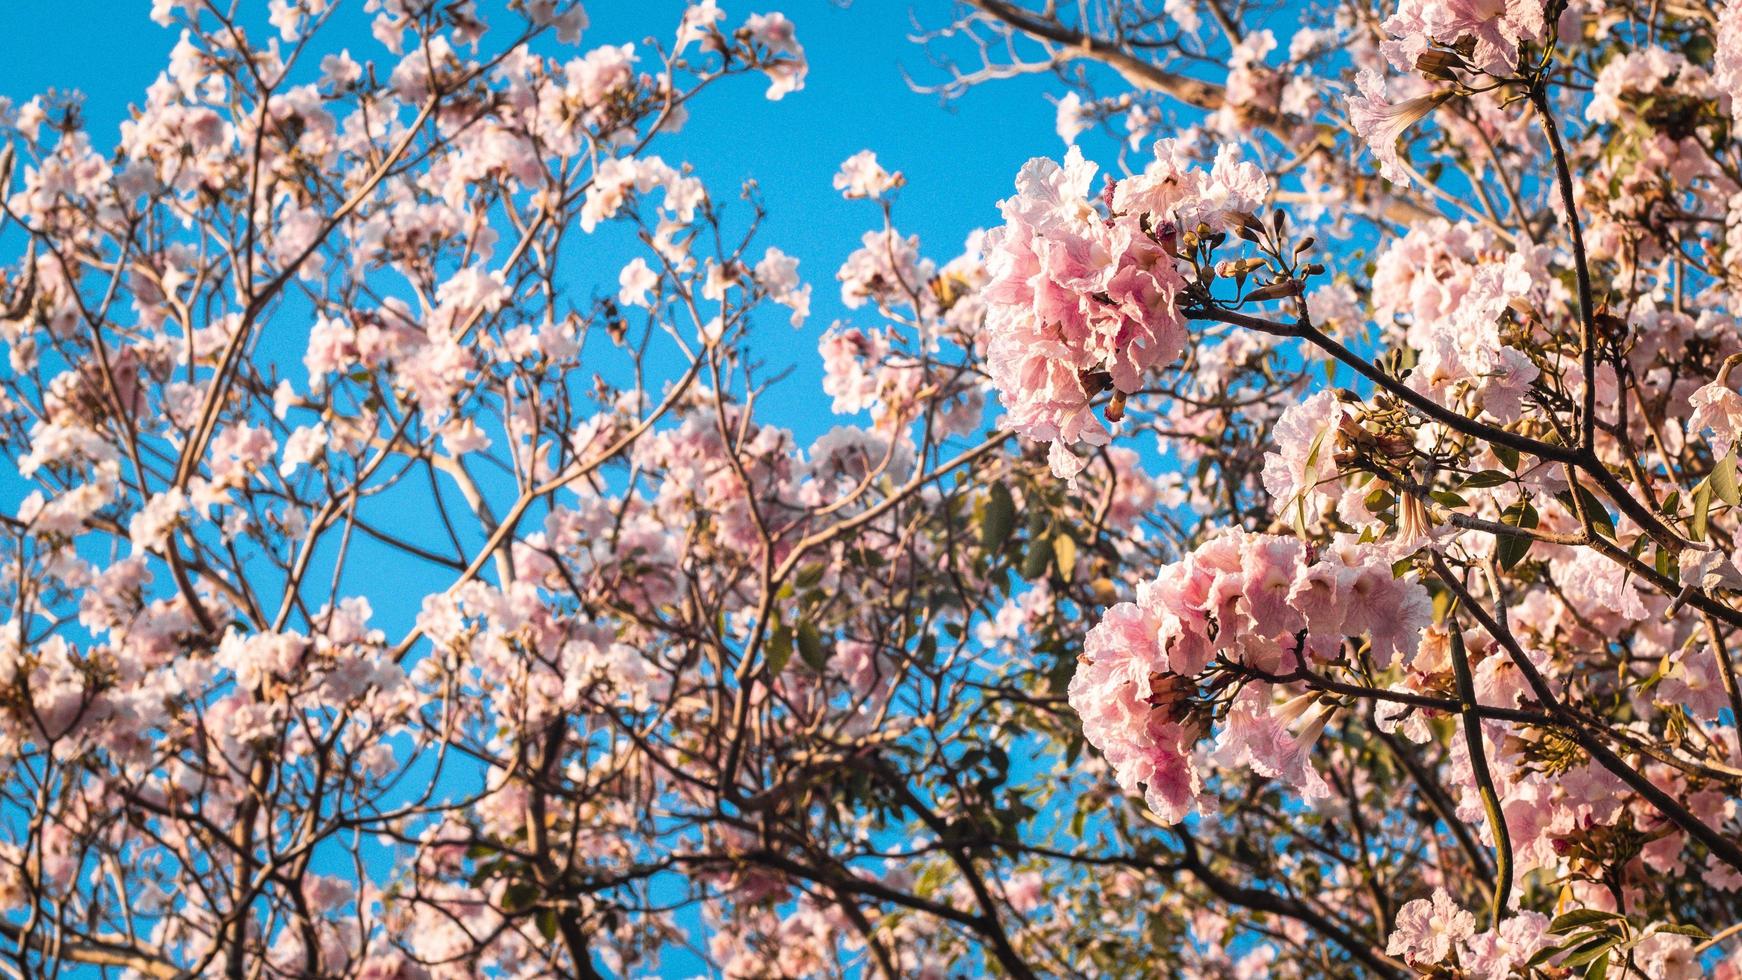 A tree with pink flowers against a blue sky - Cherry blossom